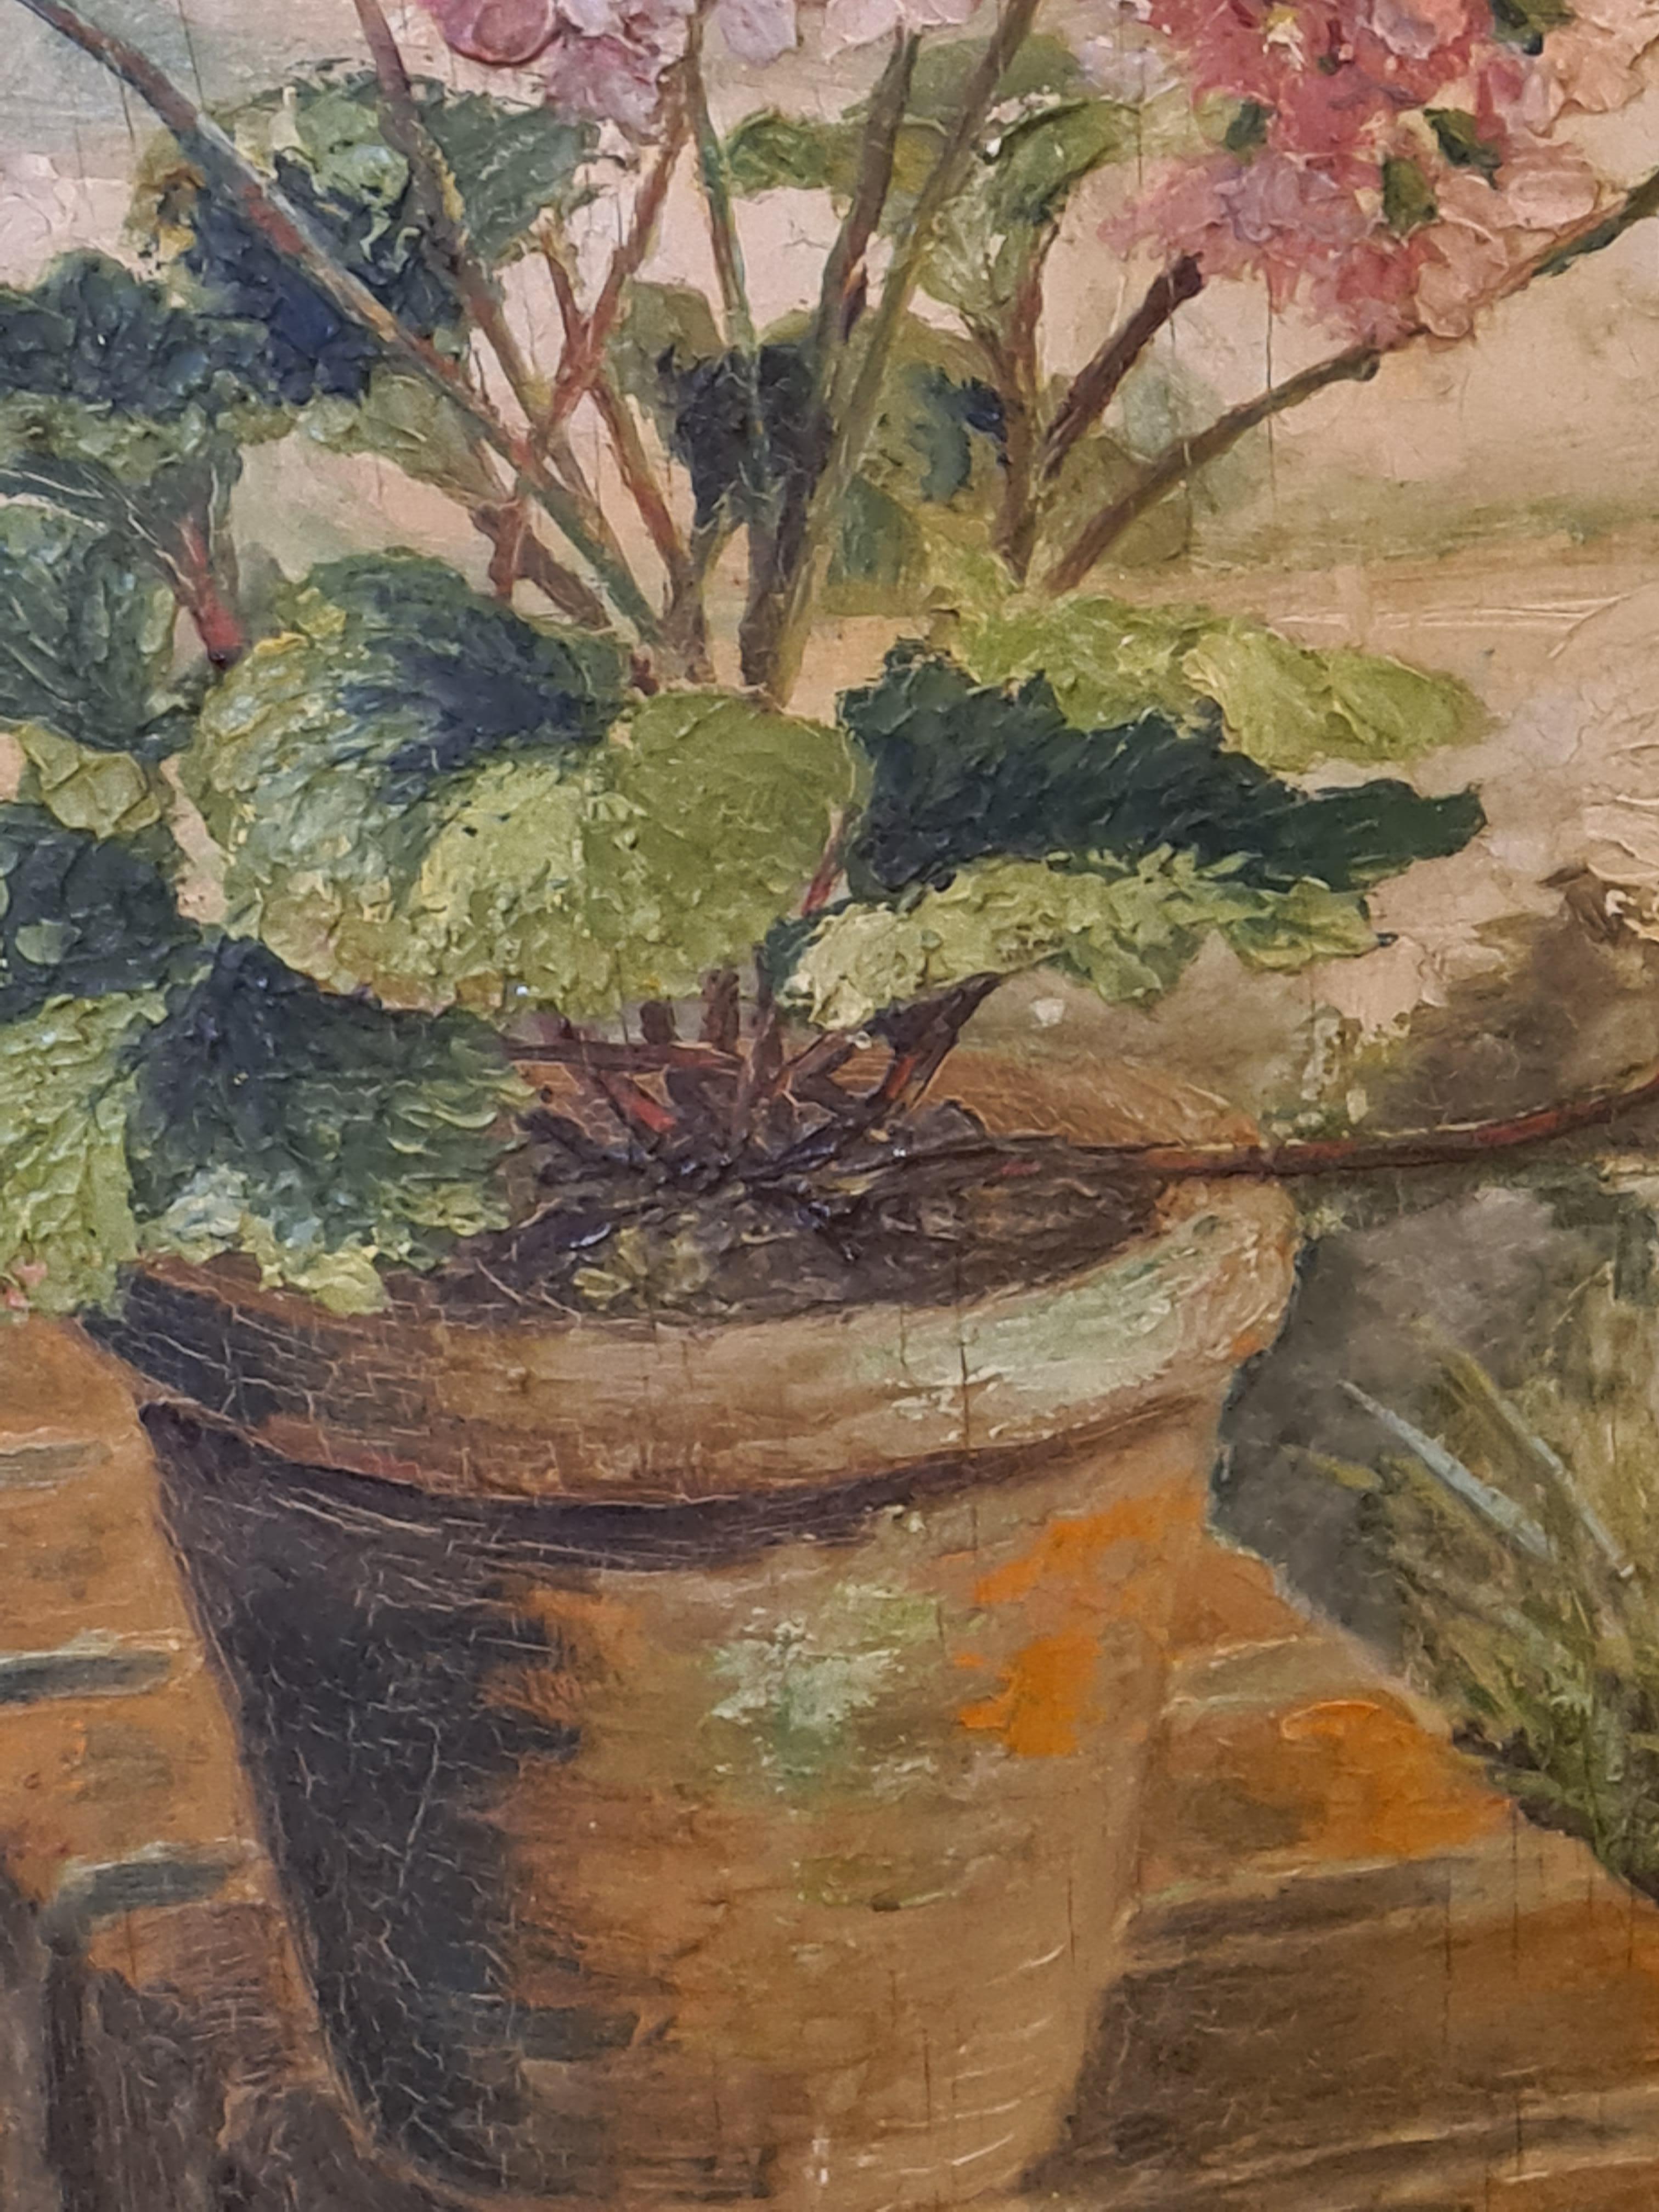 The Geranium, Large Mid Century Botanical Oil on board - Brown Landscape Painting by F Lysse.